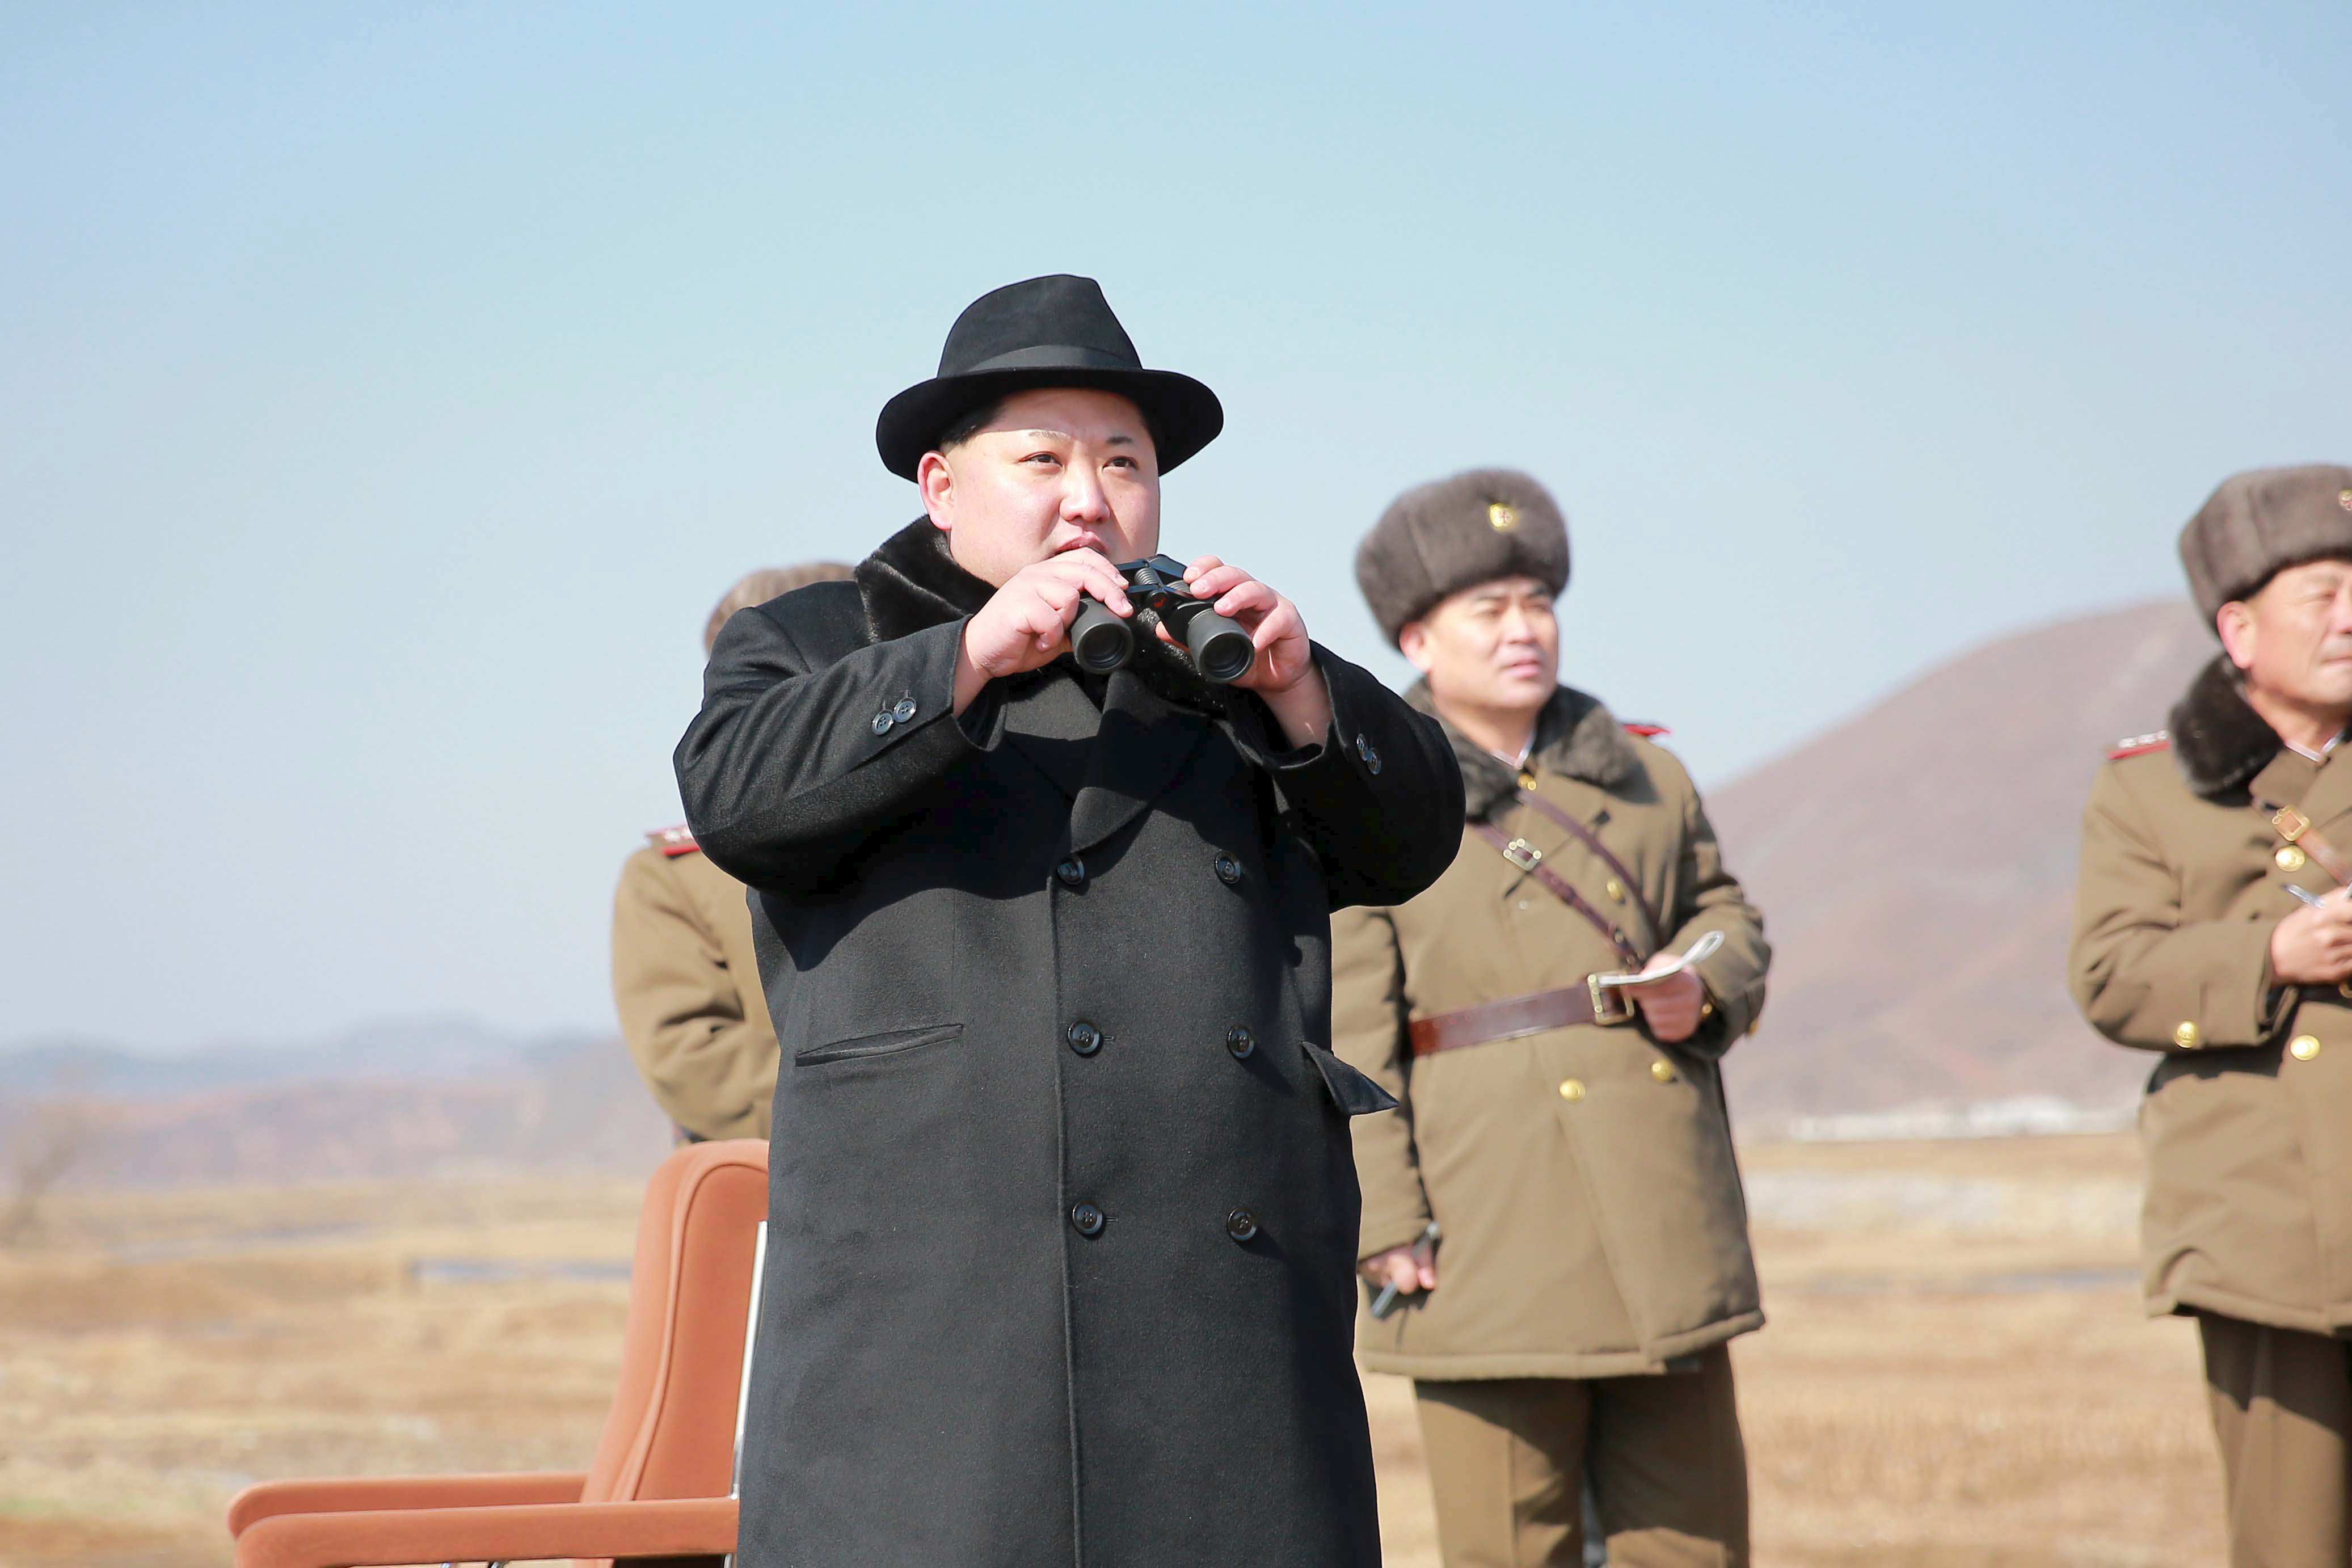 North Korean leader Kim Jong Un inspects a flight drill of fighter pilots from the Korean People's Army's (KPA) Air and Anti-Air Force, in this undated photo released by North Korea's Korean Central News Agency (KCNA) in Pyongyang on February 21, 2016. REUTERS/KCNA ATTENTION EDITORS - THIS PICTURE WAS PROVIDED BY A THIRD PARTY. REUTERS IS UNABLE TO INDEPENDENTLY VERIFY THE AUTHENTICITY, CONTENT, LOCATION OR DATE OF THIS IMAGE. FOR EDITORIAL USE ONLY. NOT FOR SALE FOR MARKETING OR ADVERTISING CAMPAIGNS. THIS PICTURE IS DISTRIBUTED EXACTLY AS RECEIVED BY REUTERS, AS A SERVICE TO CLIENTS. NO THIRD PARTY SALES. SOUTH KOREA OUT. NO COMMERCIAL OR EDITORIAL SALES IN SOUTH KOREA. - RTX27VMH